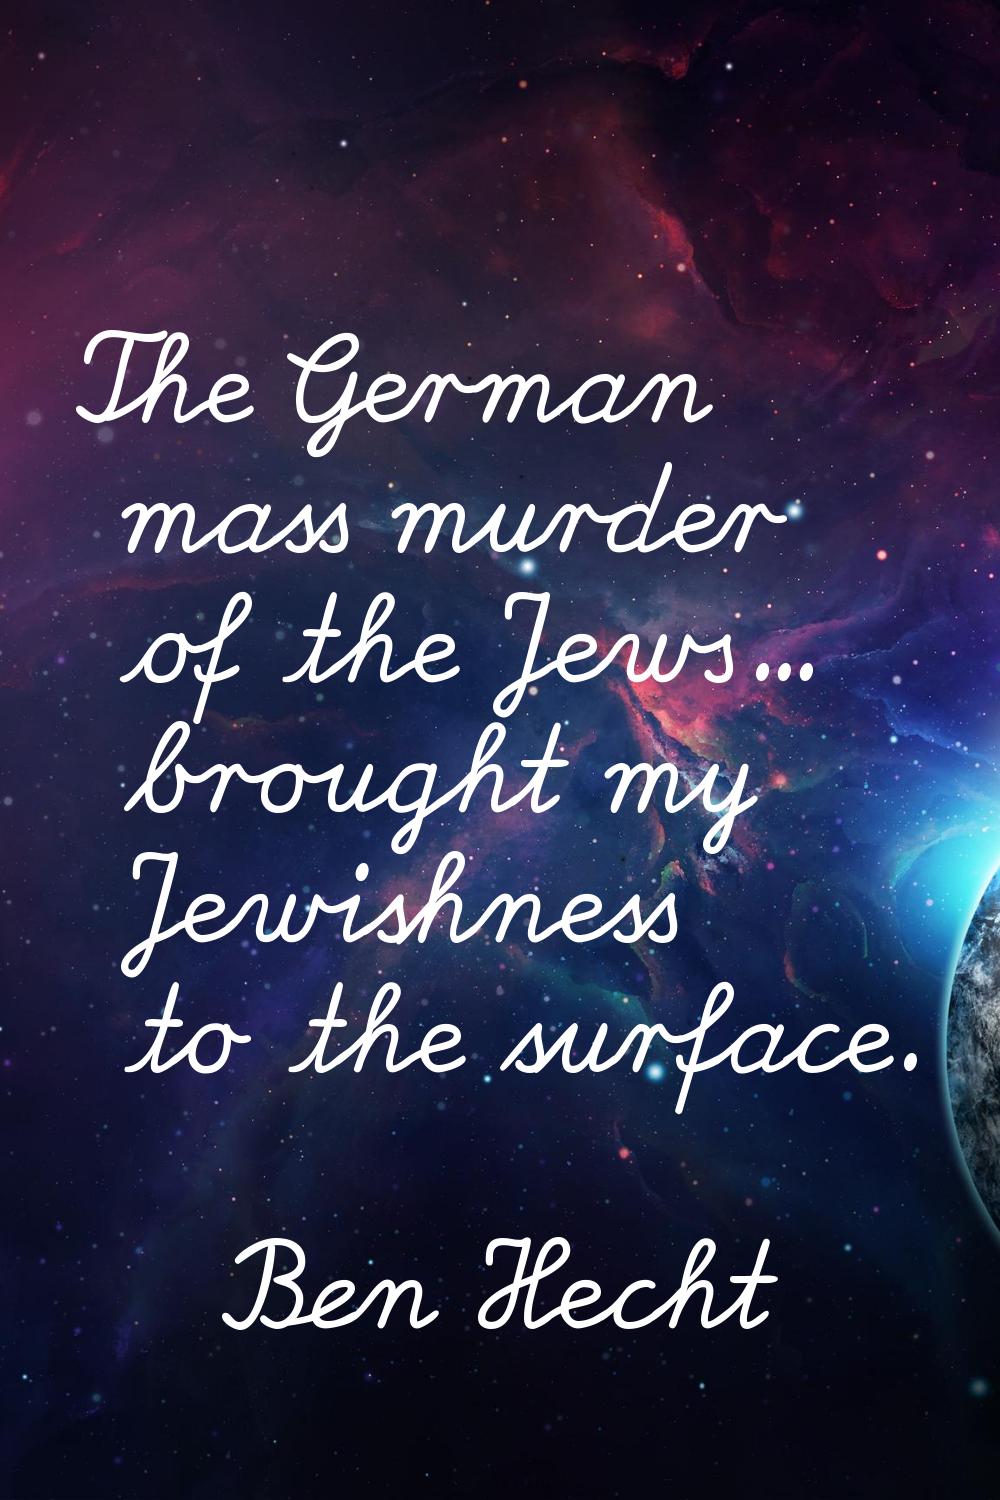 The German mass murder of the Jews... brought my Jewishness to the surface.